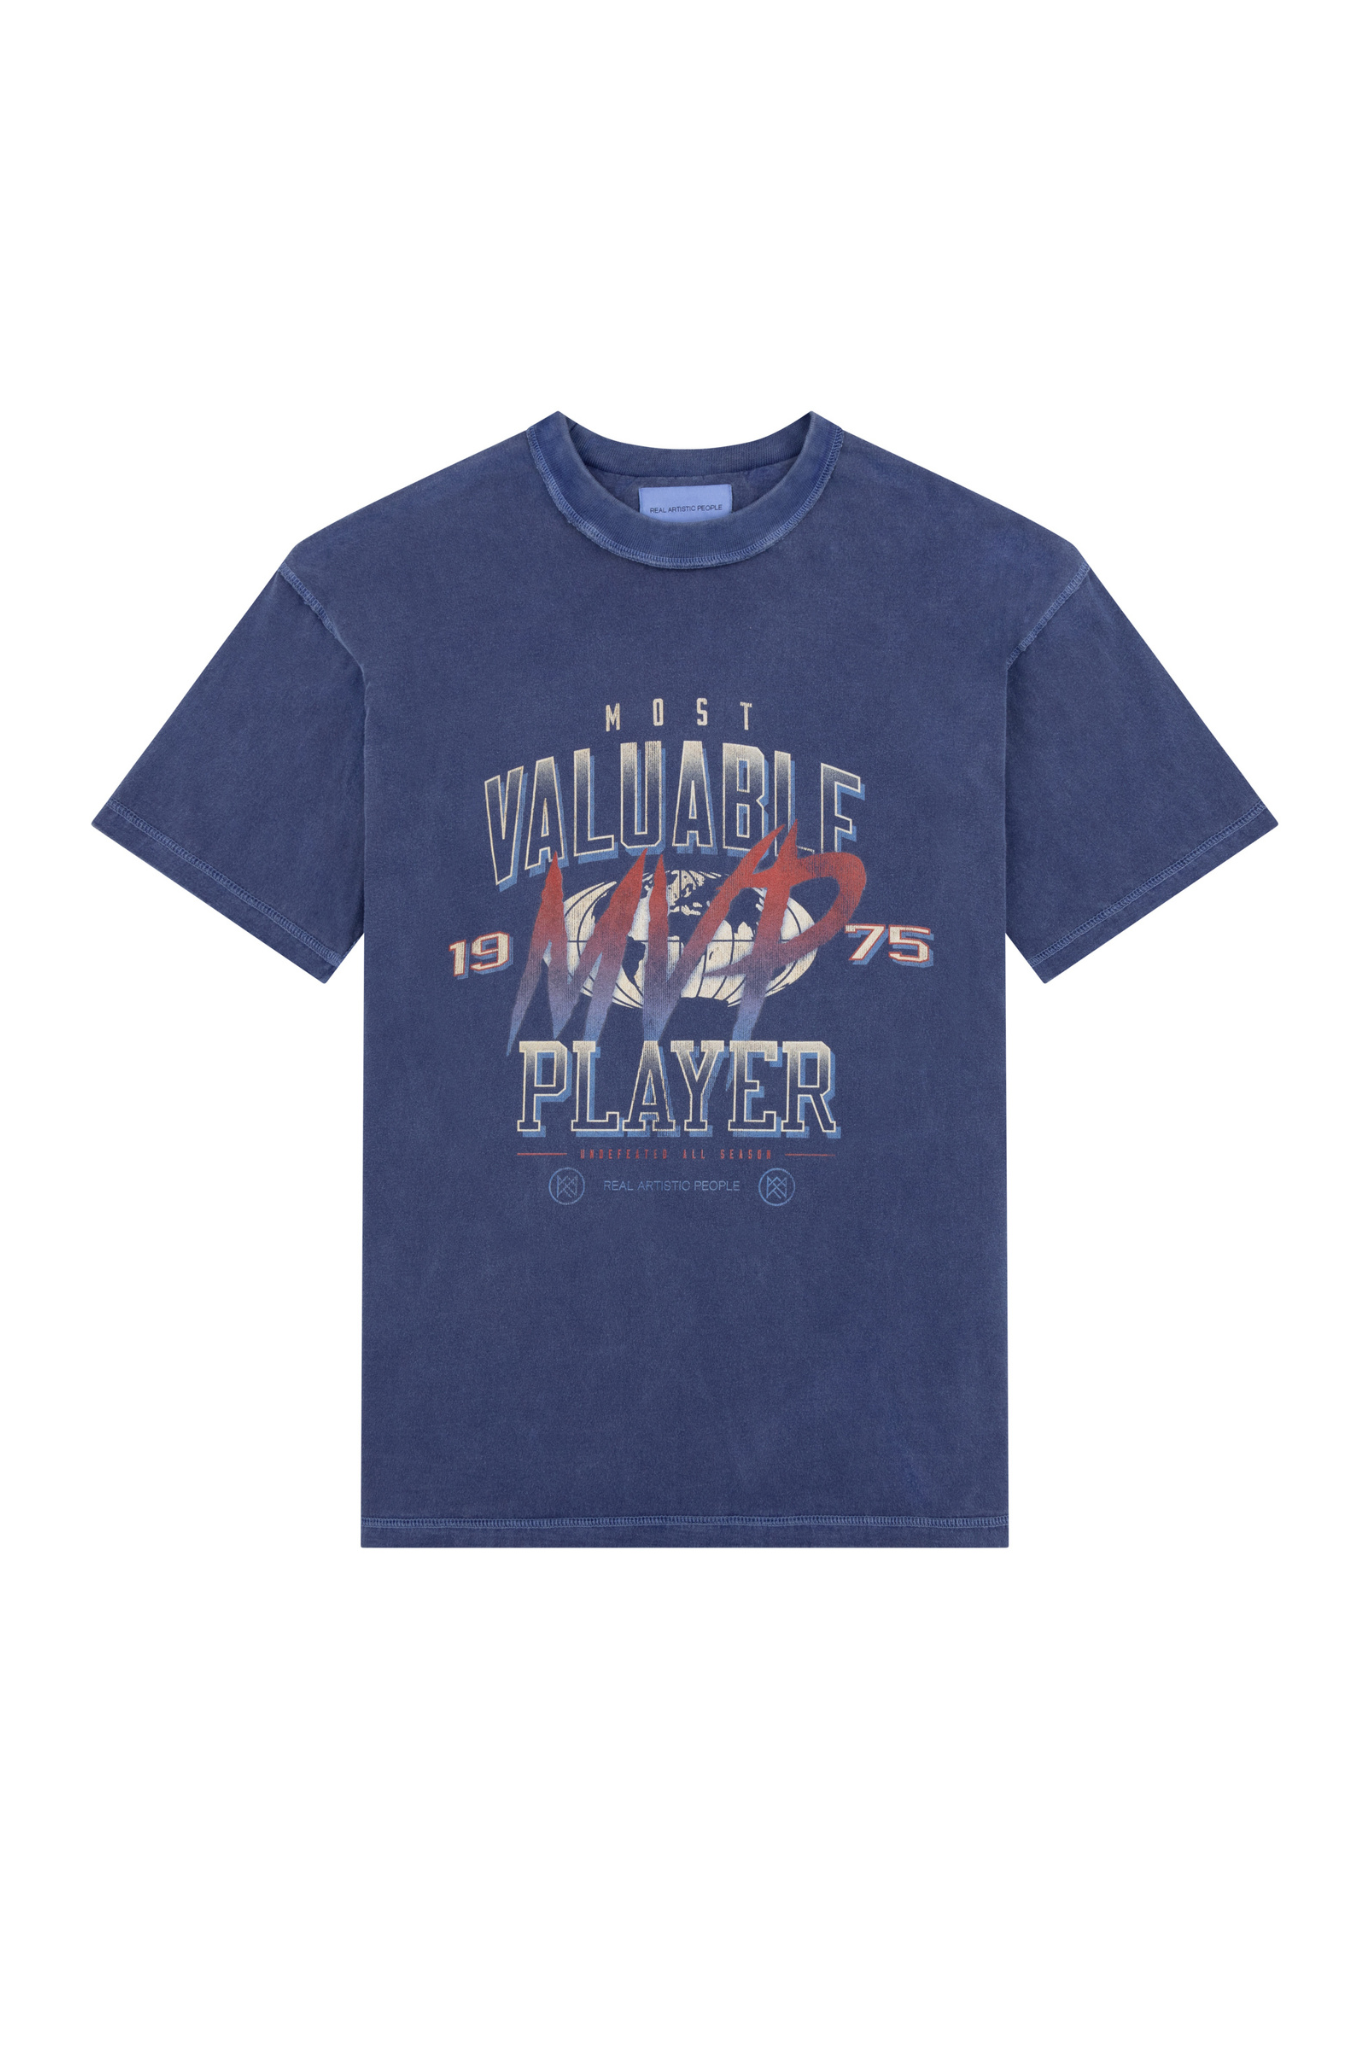 Most Valuable Player Graphic Tee - Real Artistic People